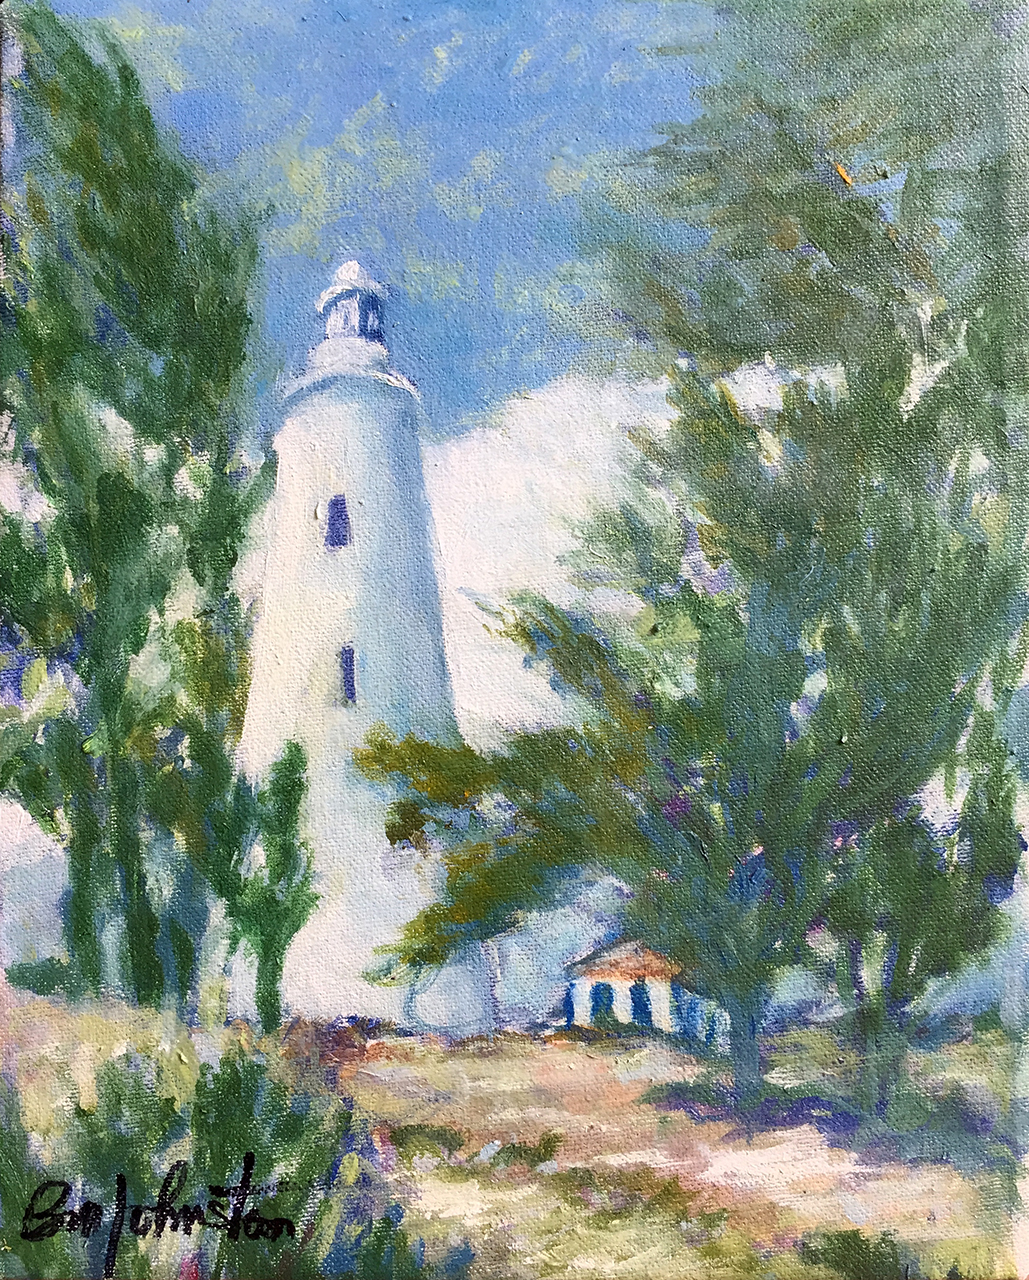 Great Inagua Lighthouse III - Brian M. Johnston - North American Impressionist - 8" x 10" oil on canvas - US$. 500.